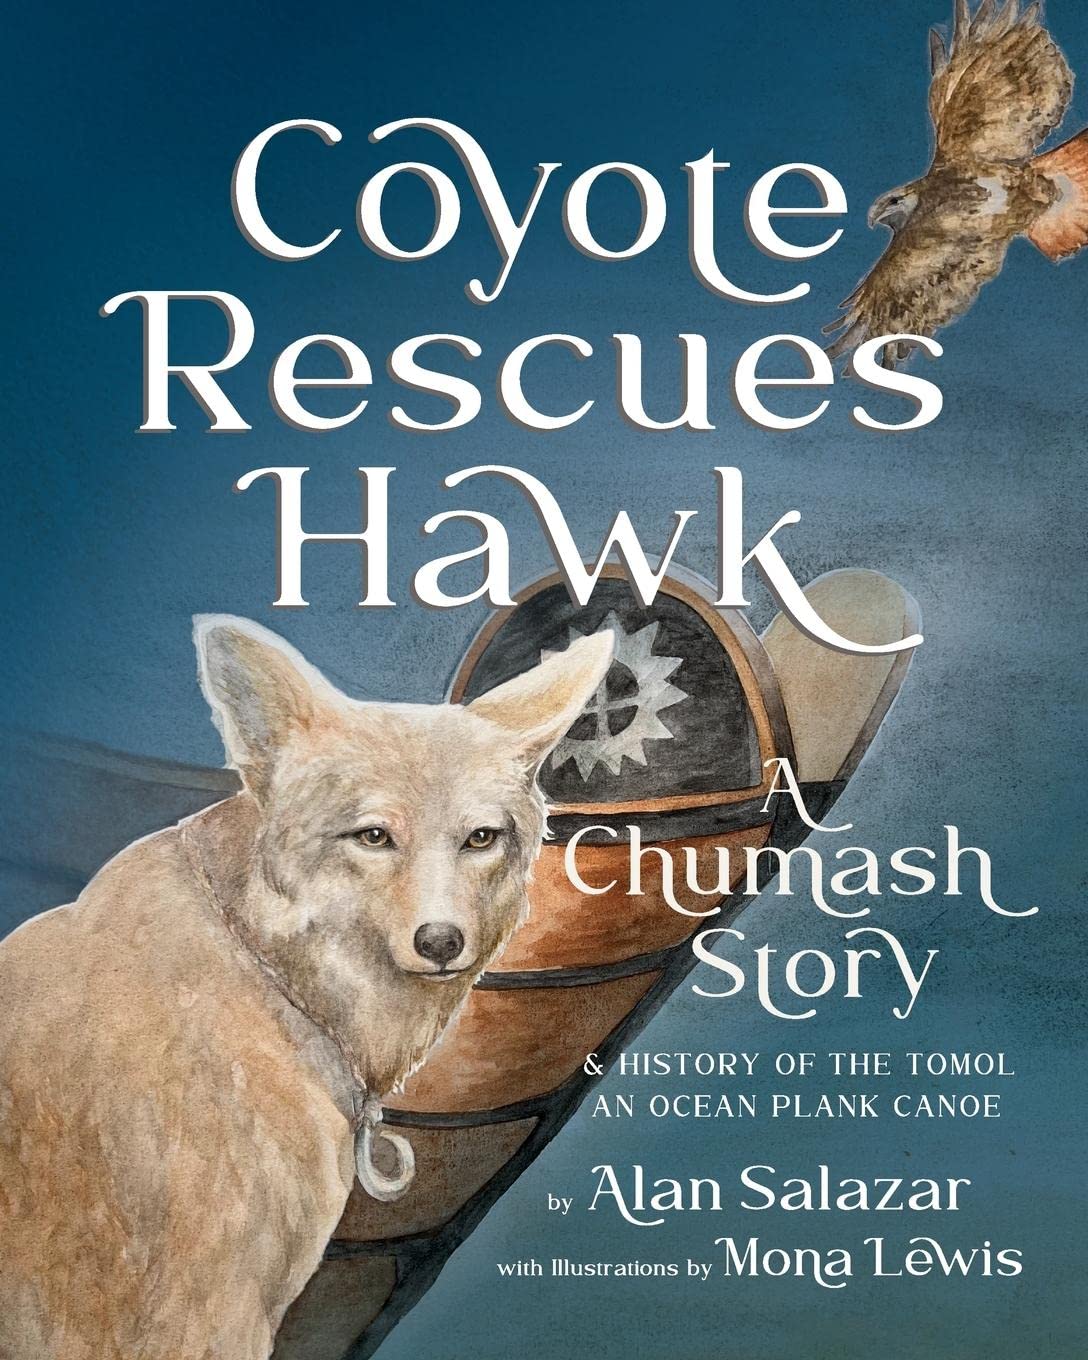 Coyote Rescues Hawk: A Chumash Story & History of the Tomol-an Ocean Plank Canoe (PB)